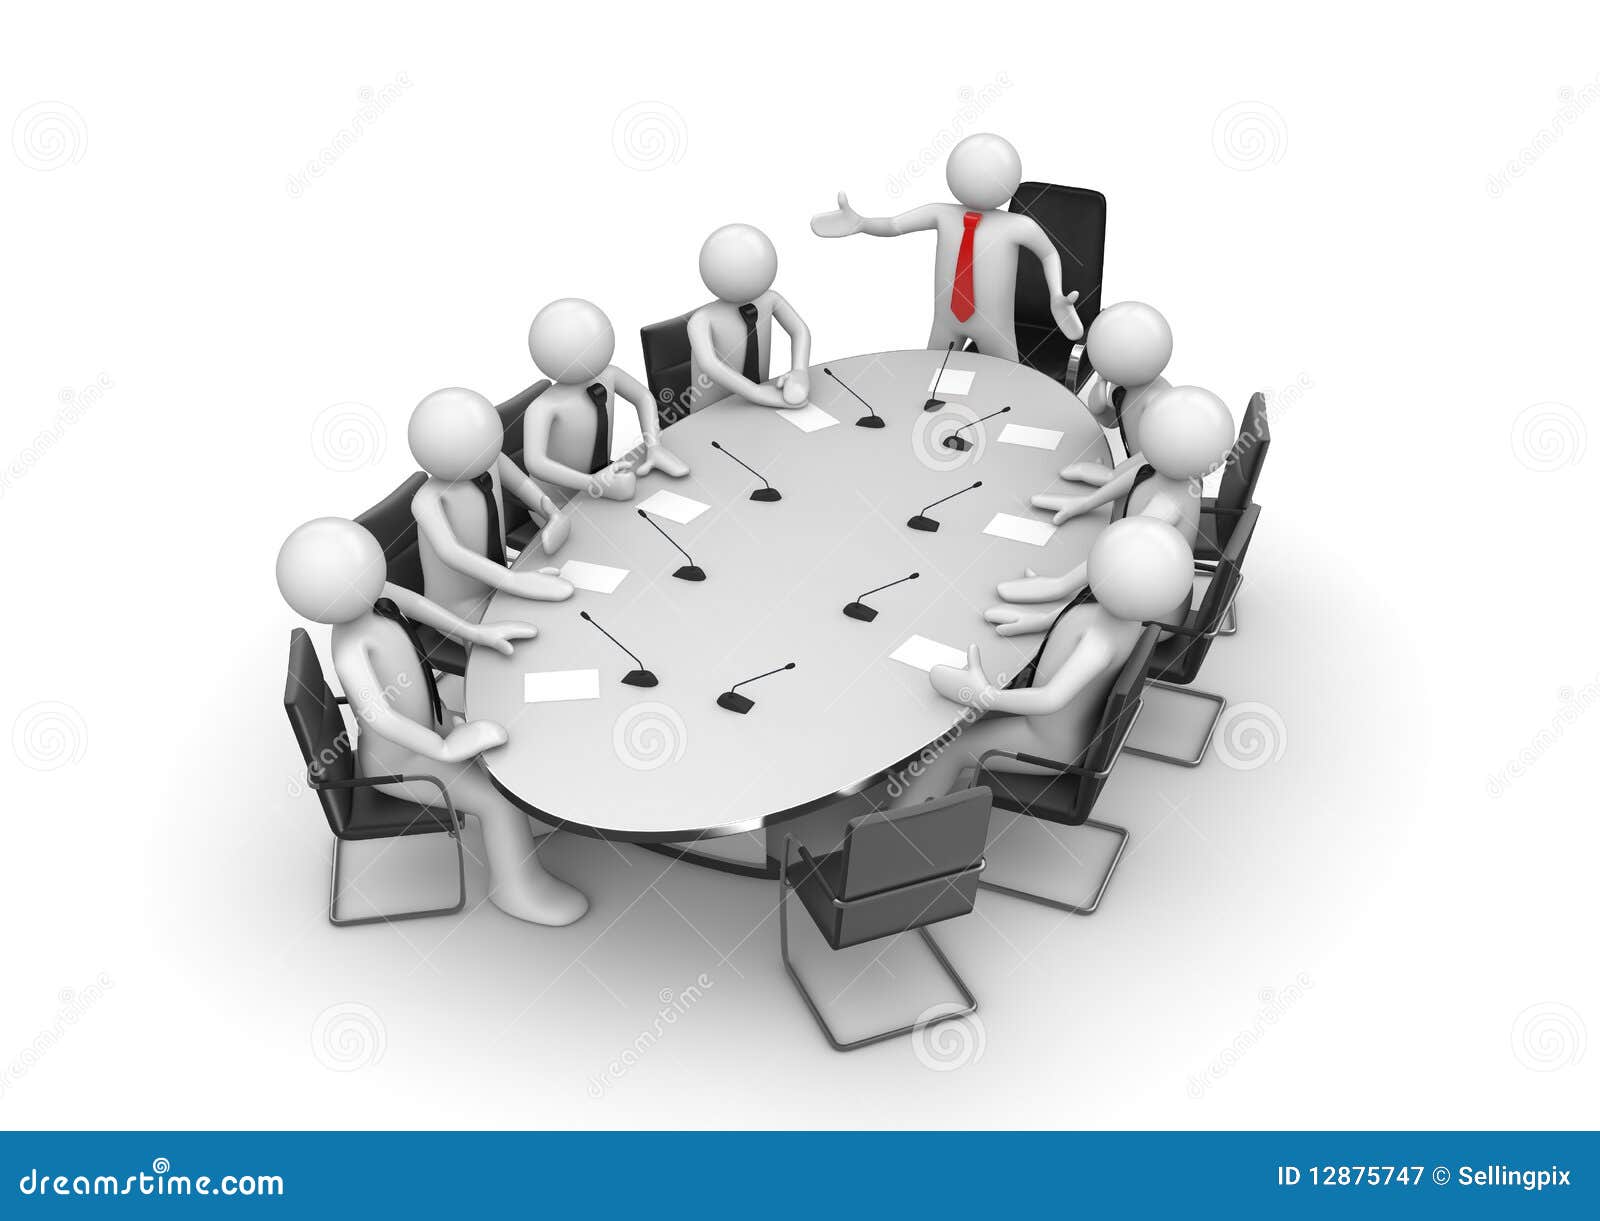 free clipart meeting room - photo #9